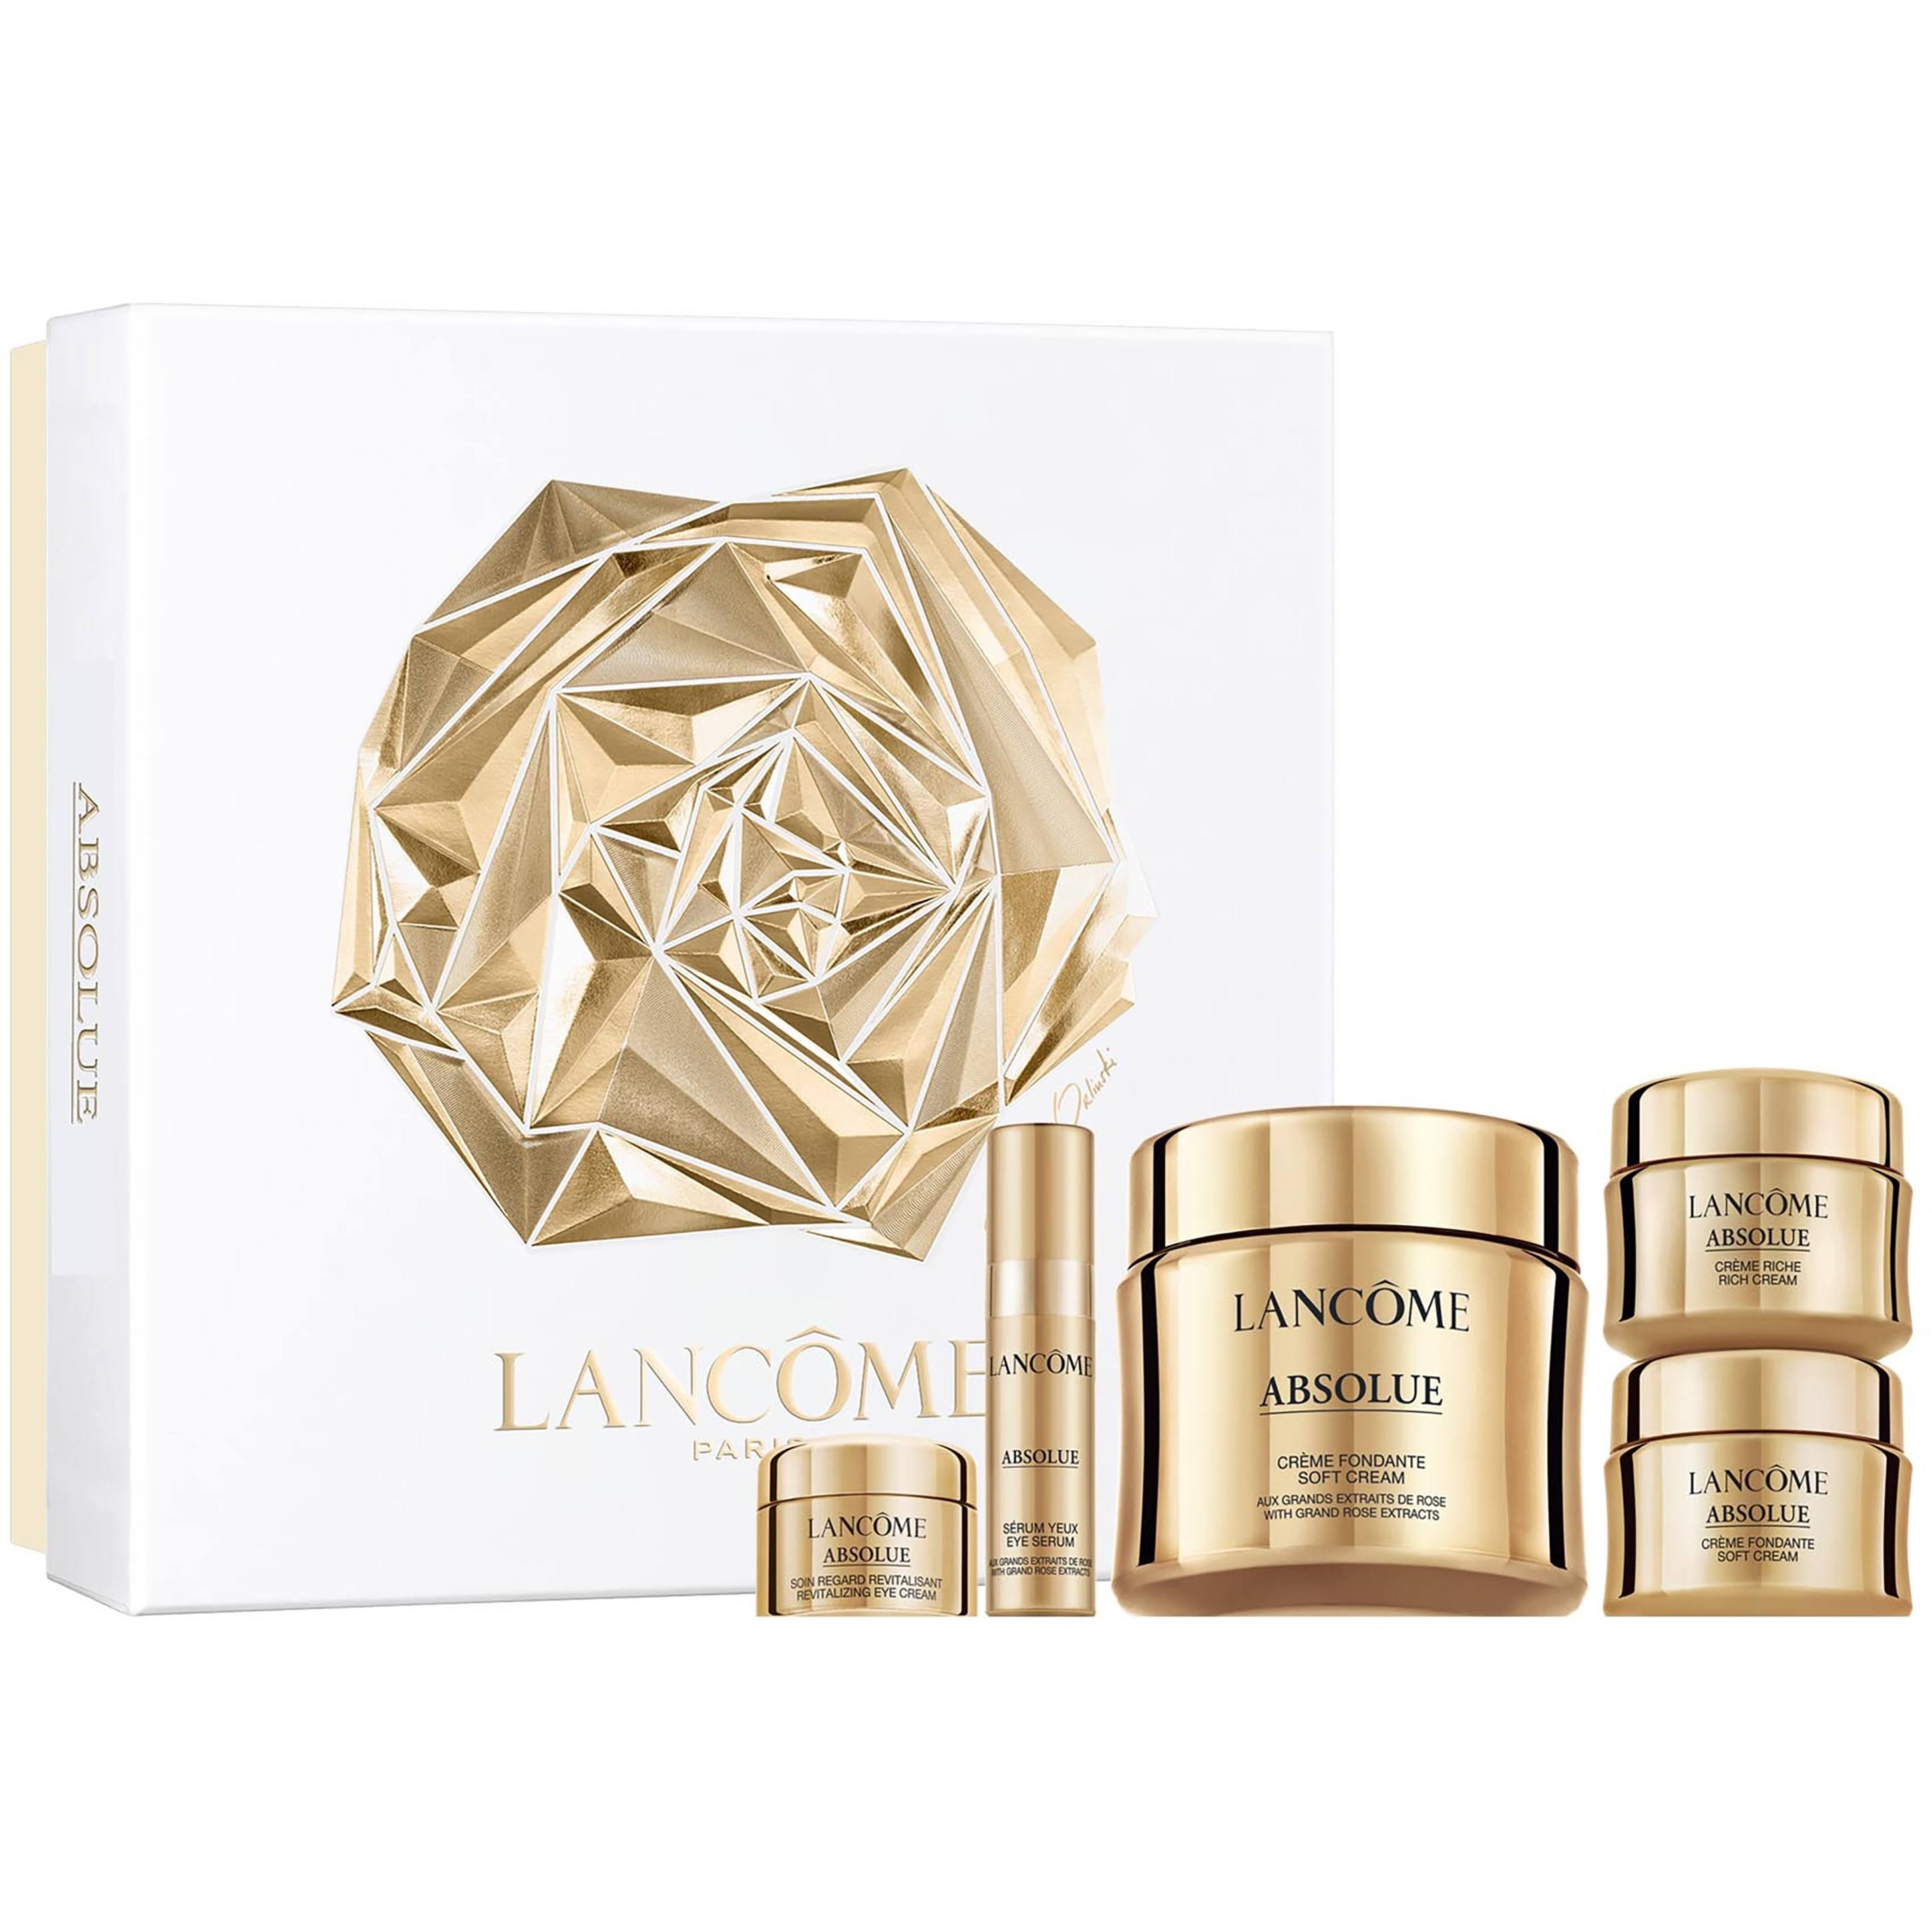 Lancôme -Absolue Soft Cream Holiday Collection Gift Set For Her